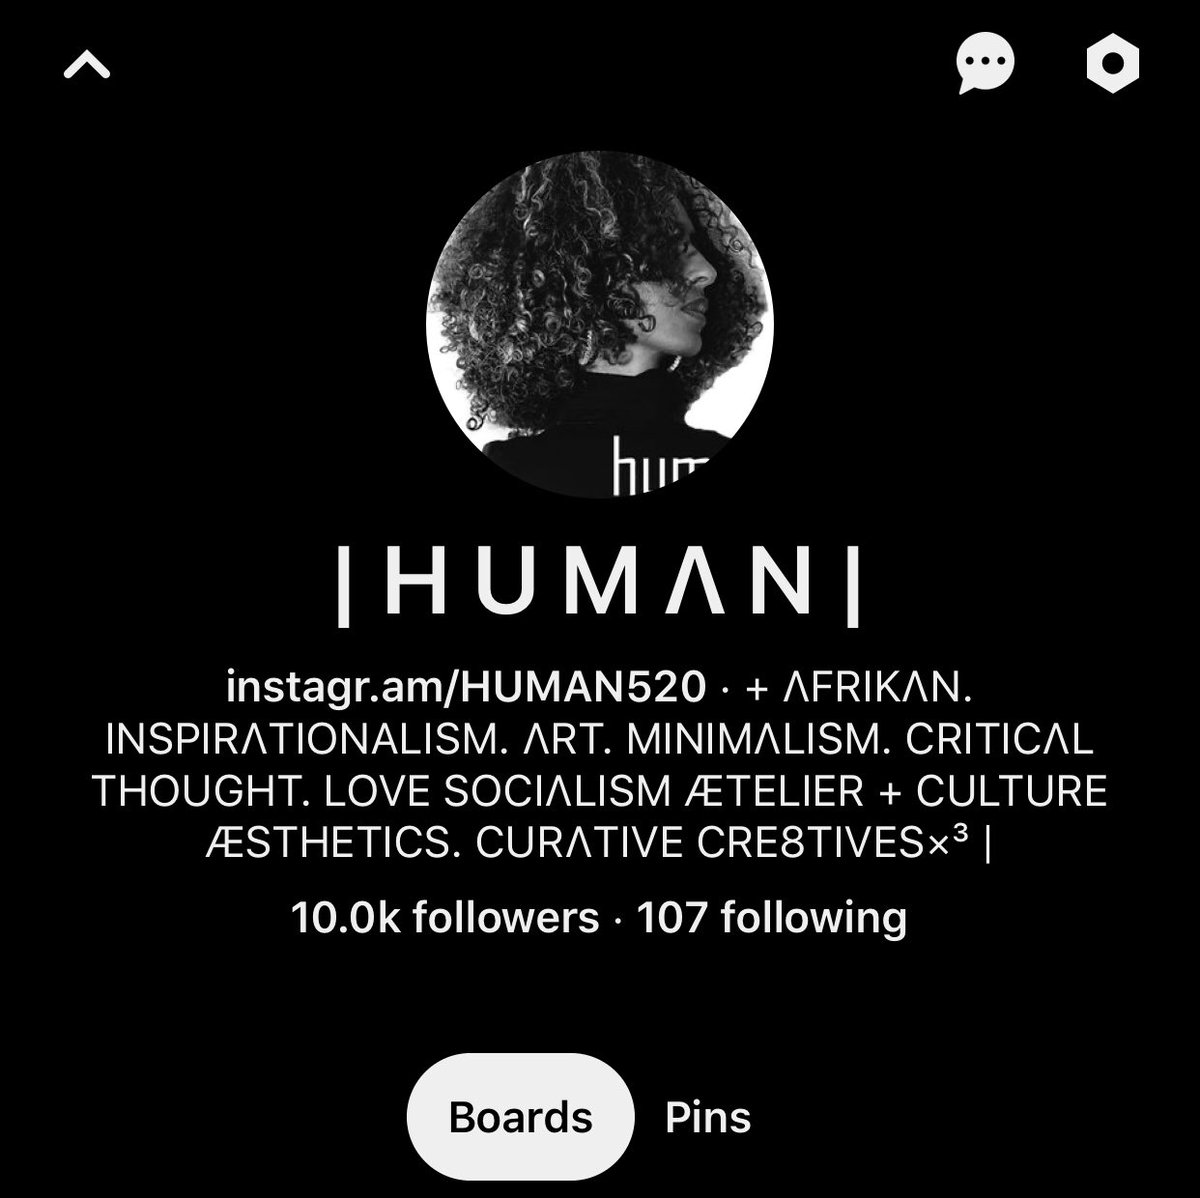 + in the meantime, have a look at our #pinterest page: pinterest.com/HUMAN520 (cc @Pinterest)